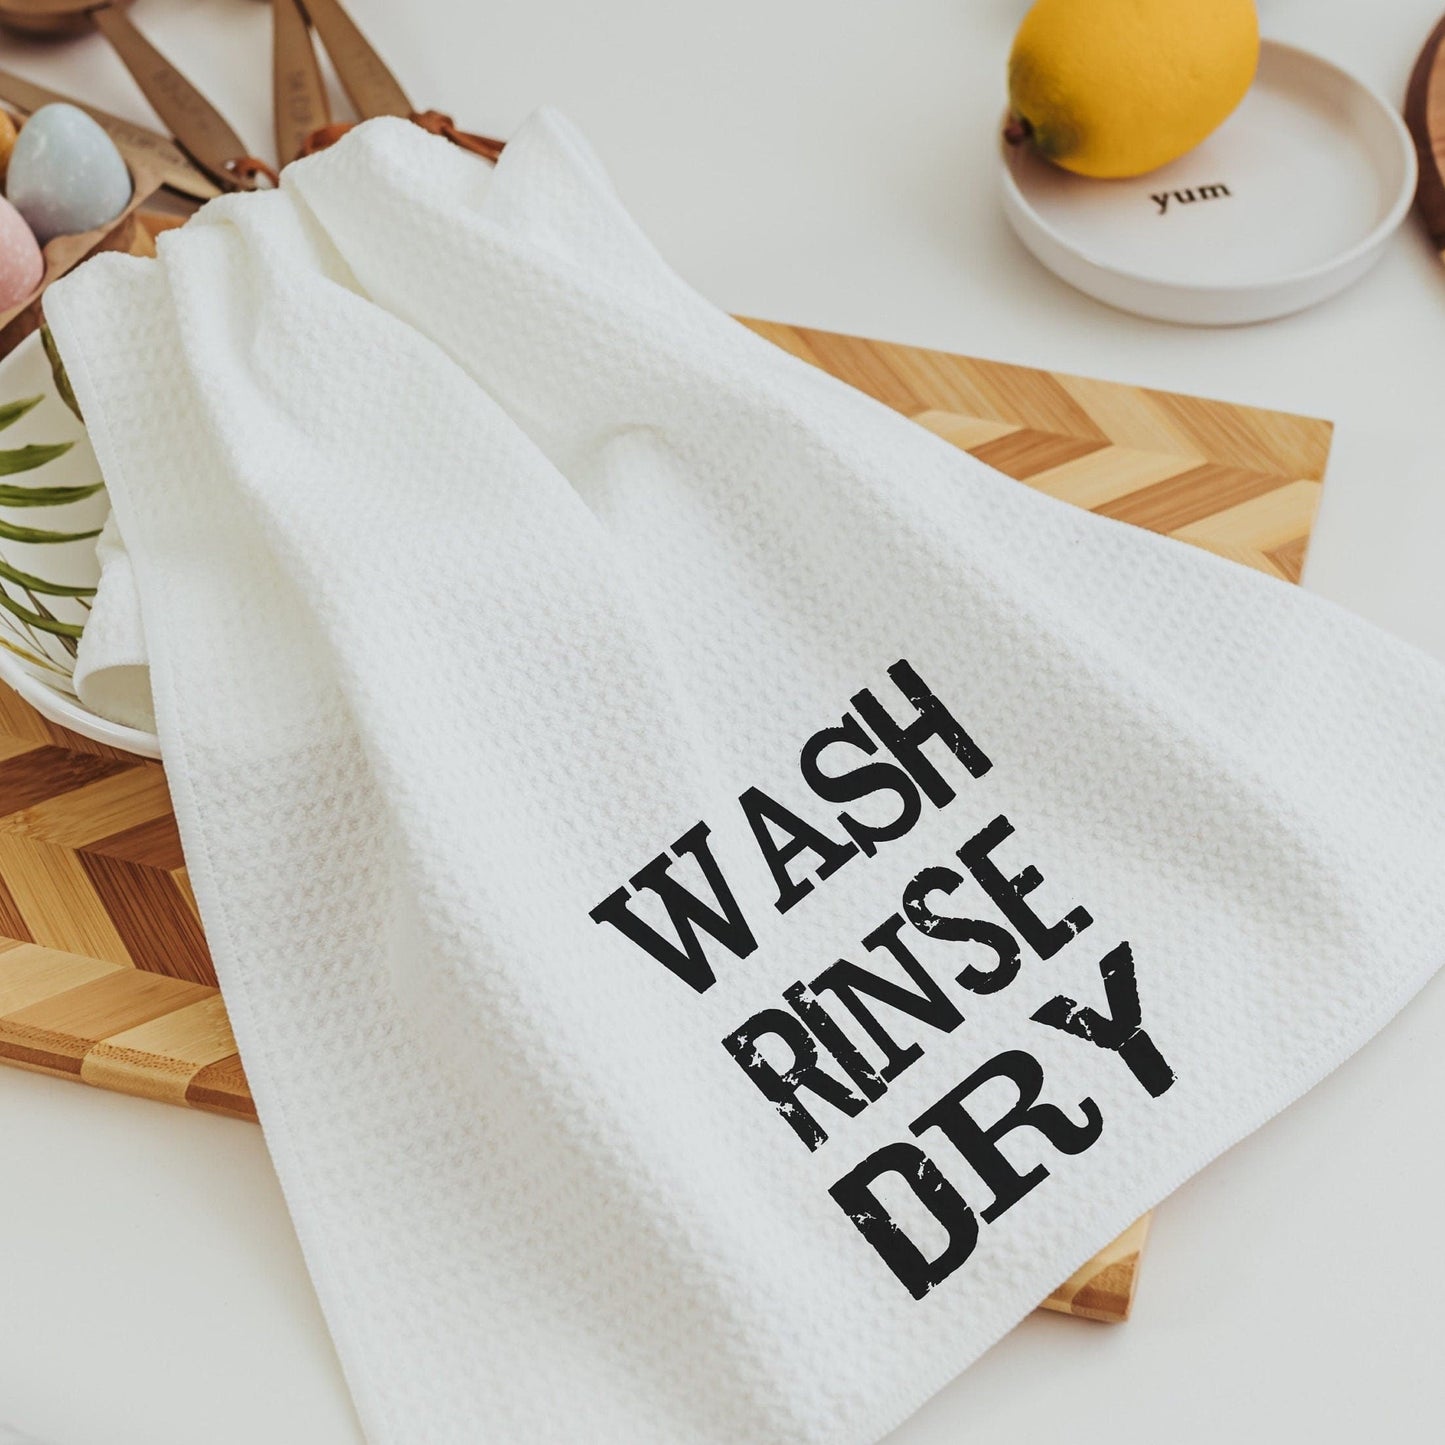 wash rinse dry kitchen towels